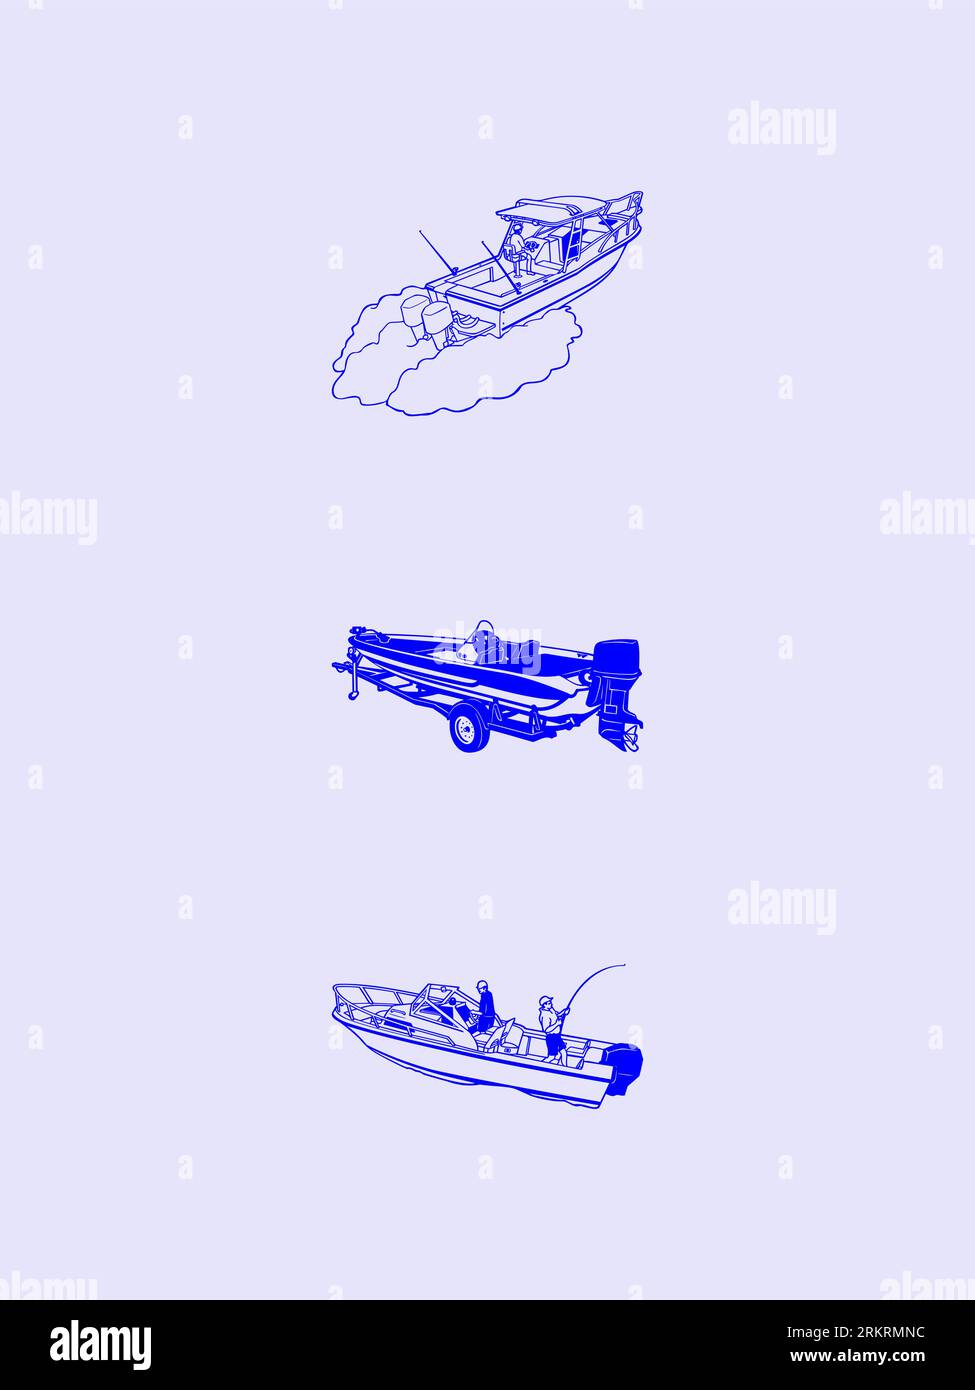 HOW TO DRAW A SPEED BOAT EASY 